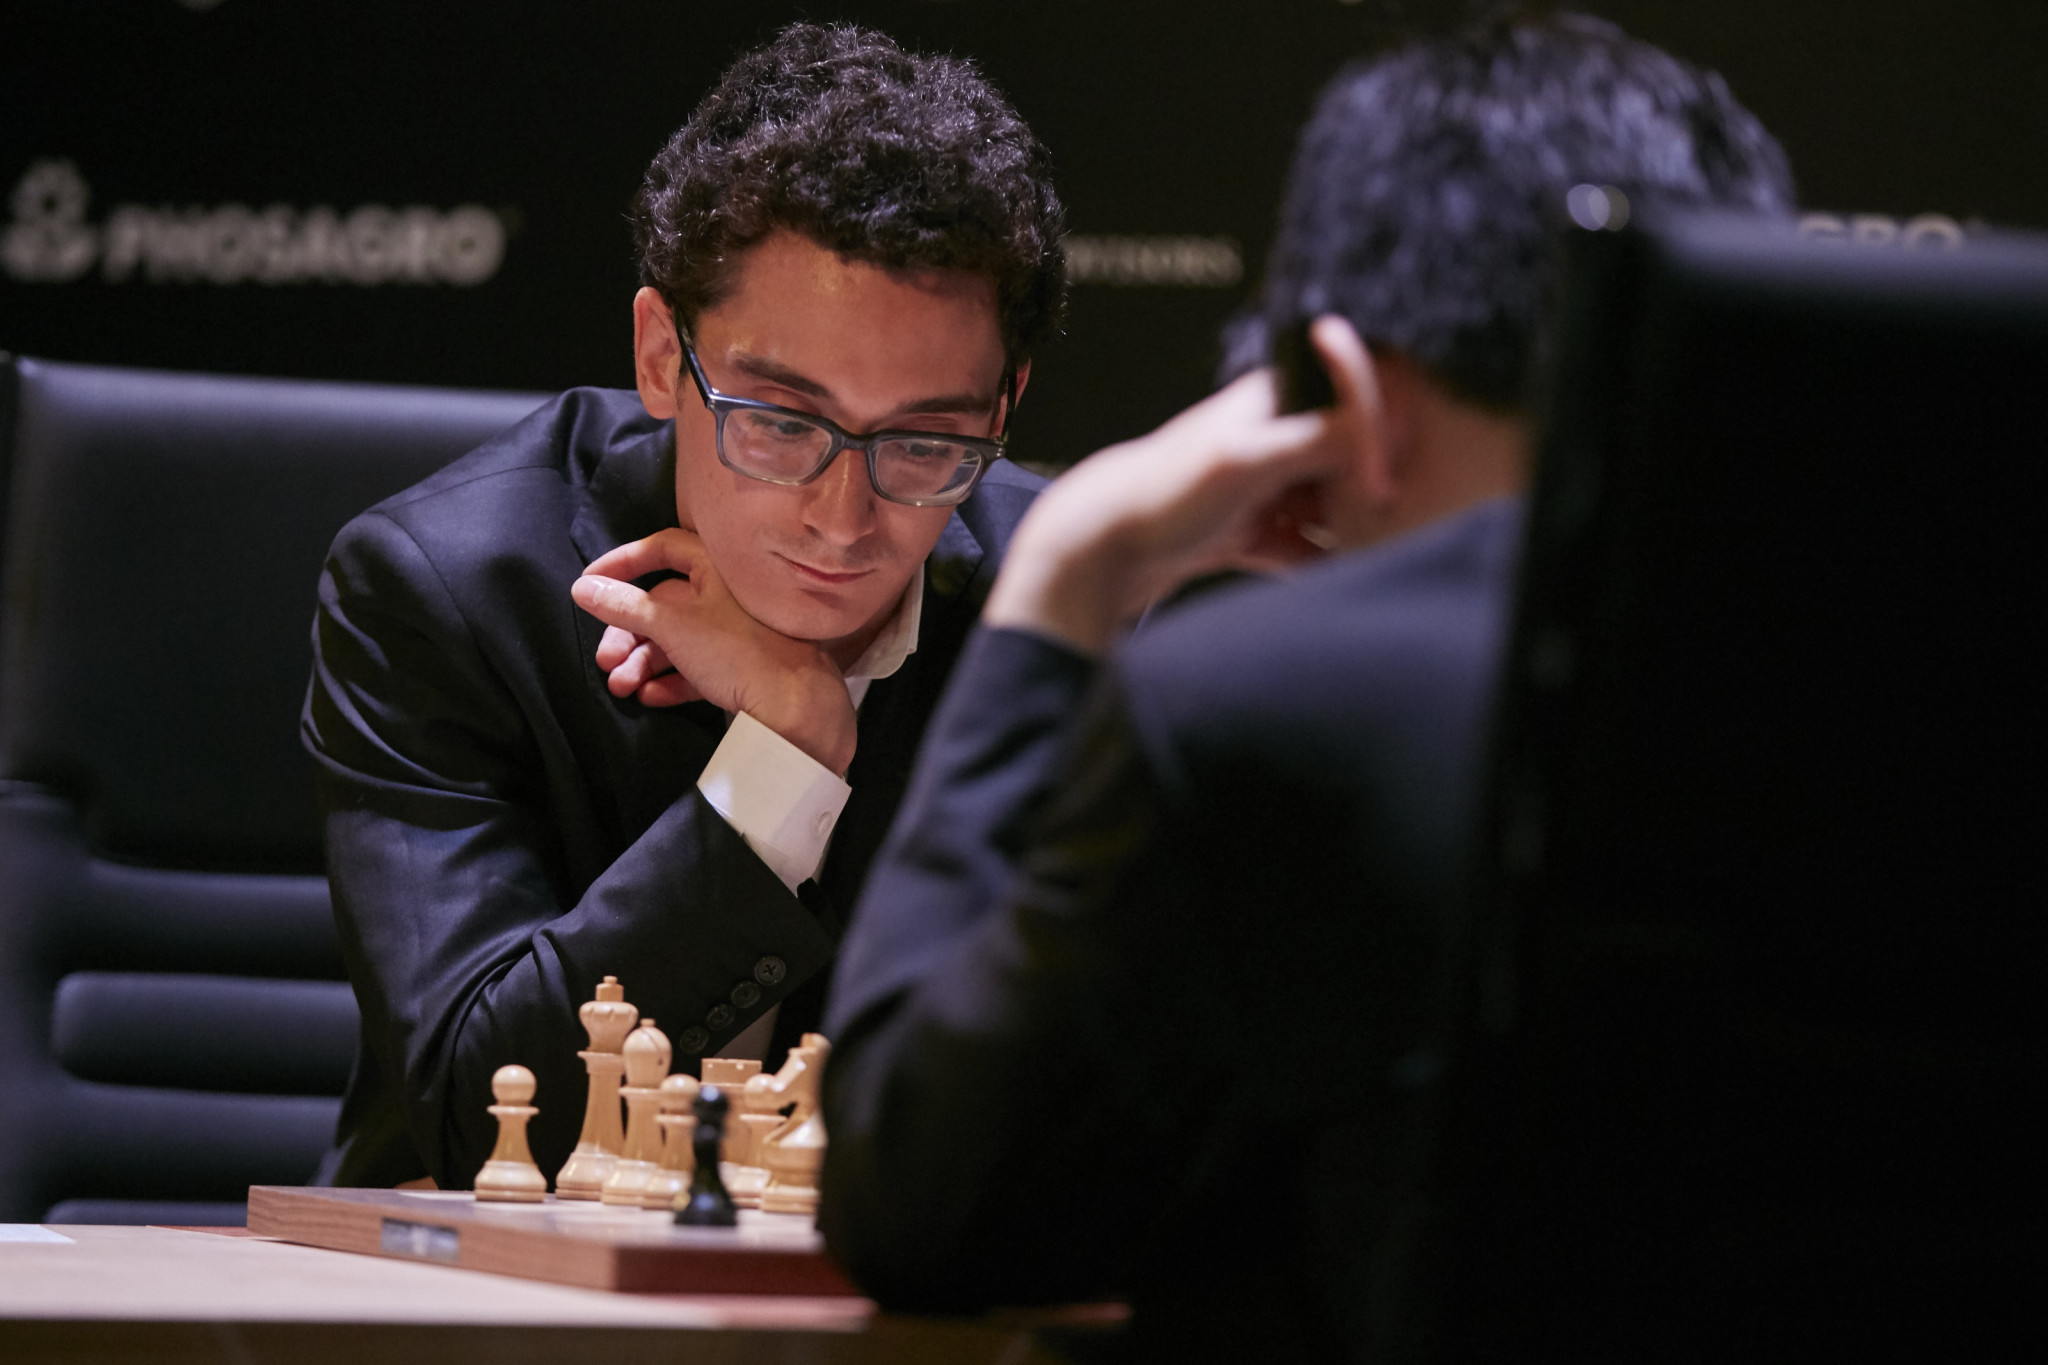 Today in Chess: FIDE Candidates 2022 Round 1 Recap